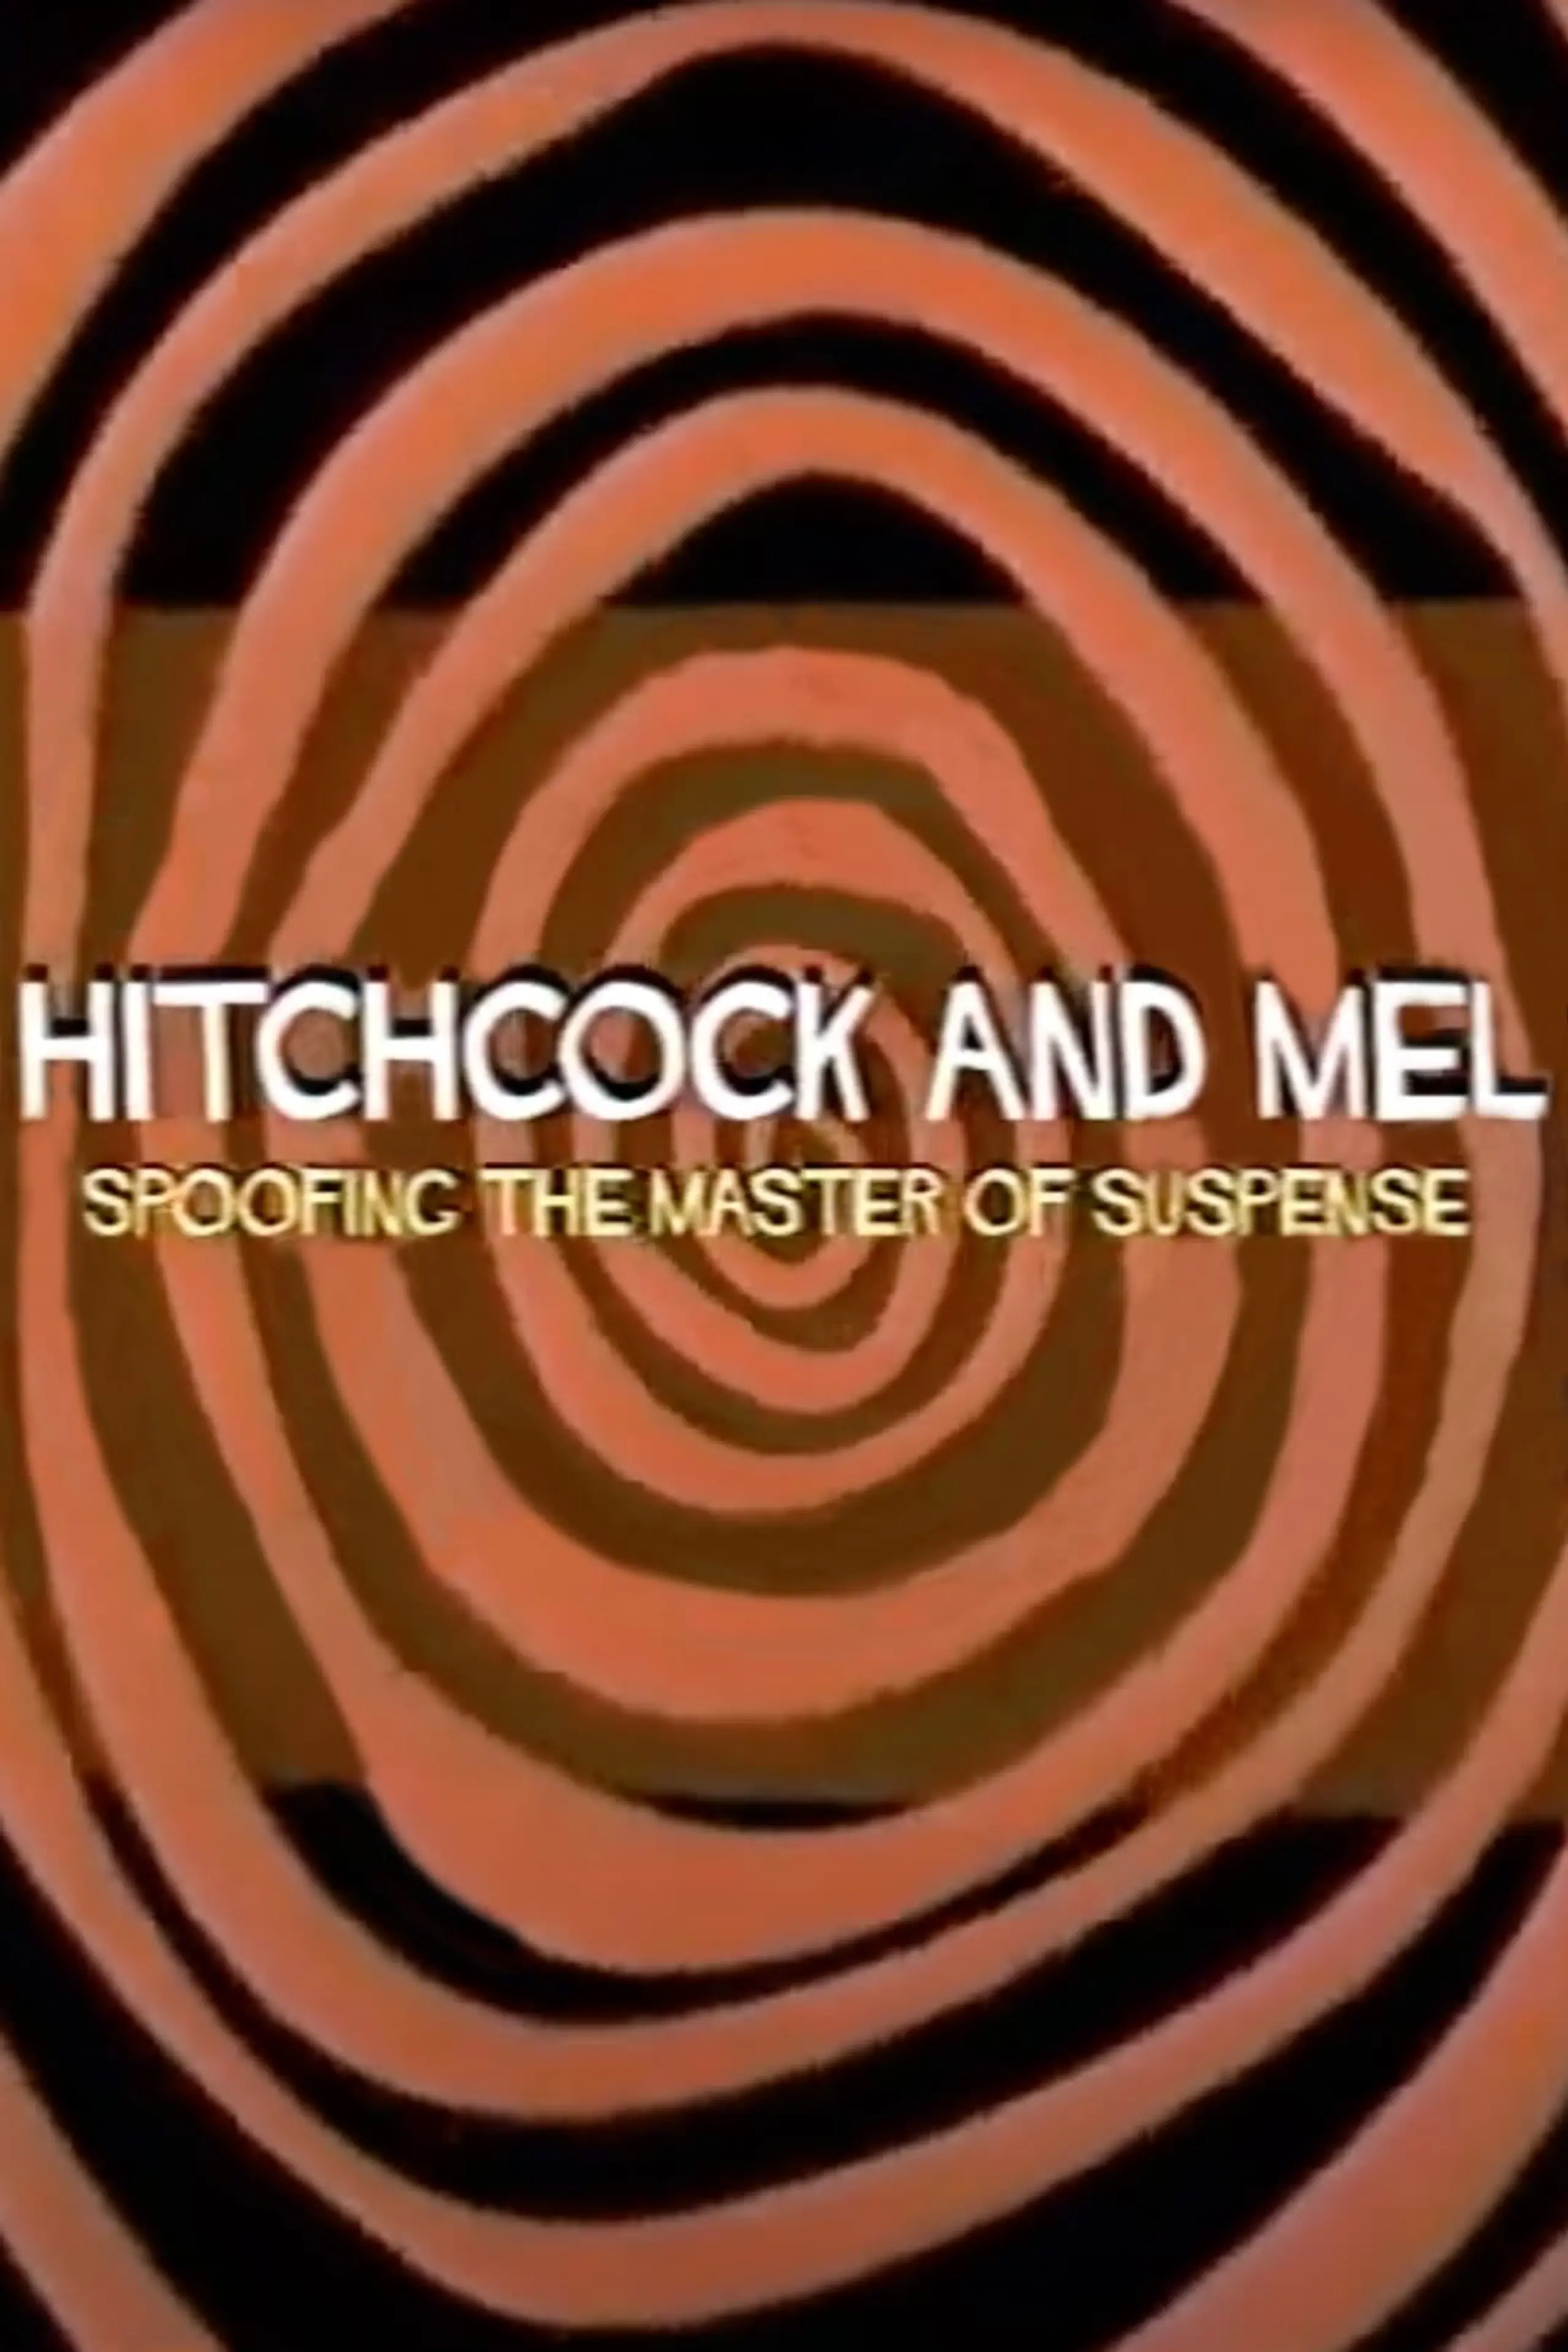 Hitchcock and Mel: Spoofing the Master of Suspense